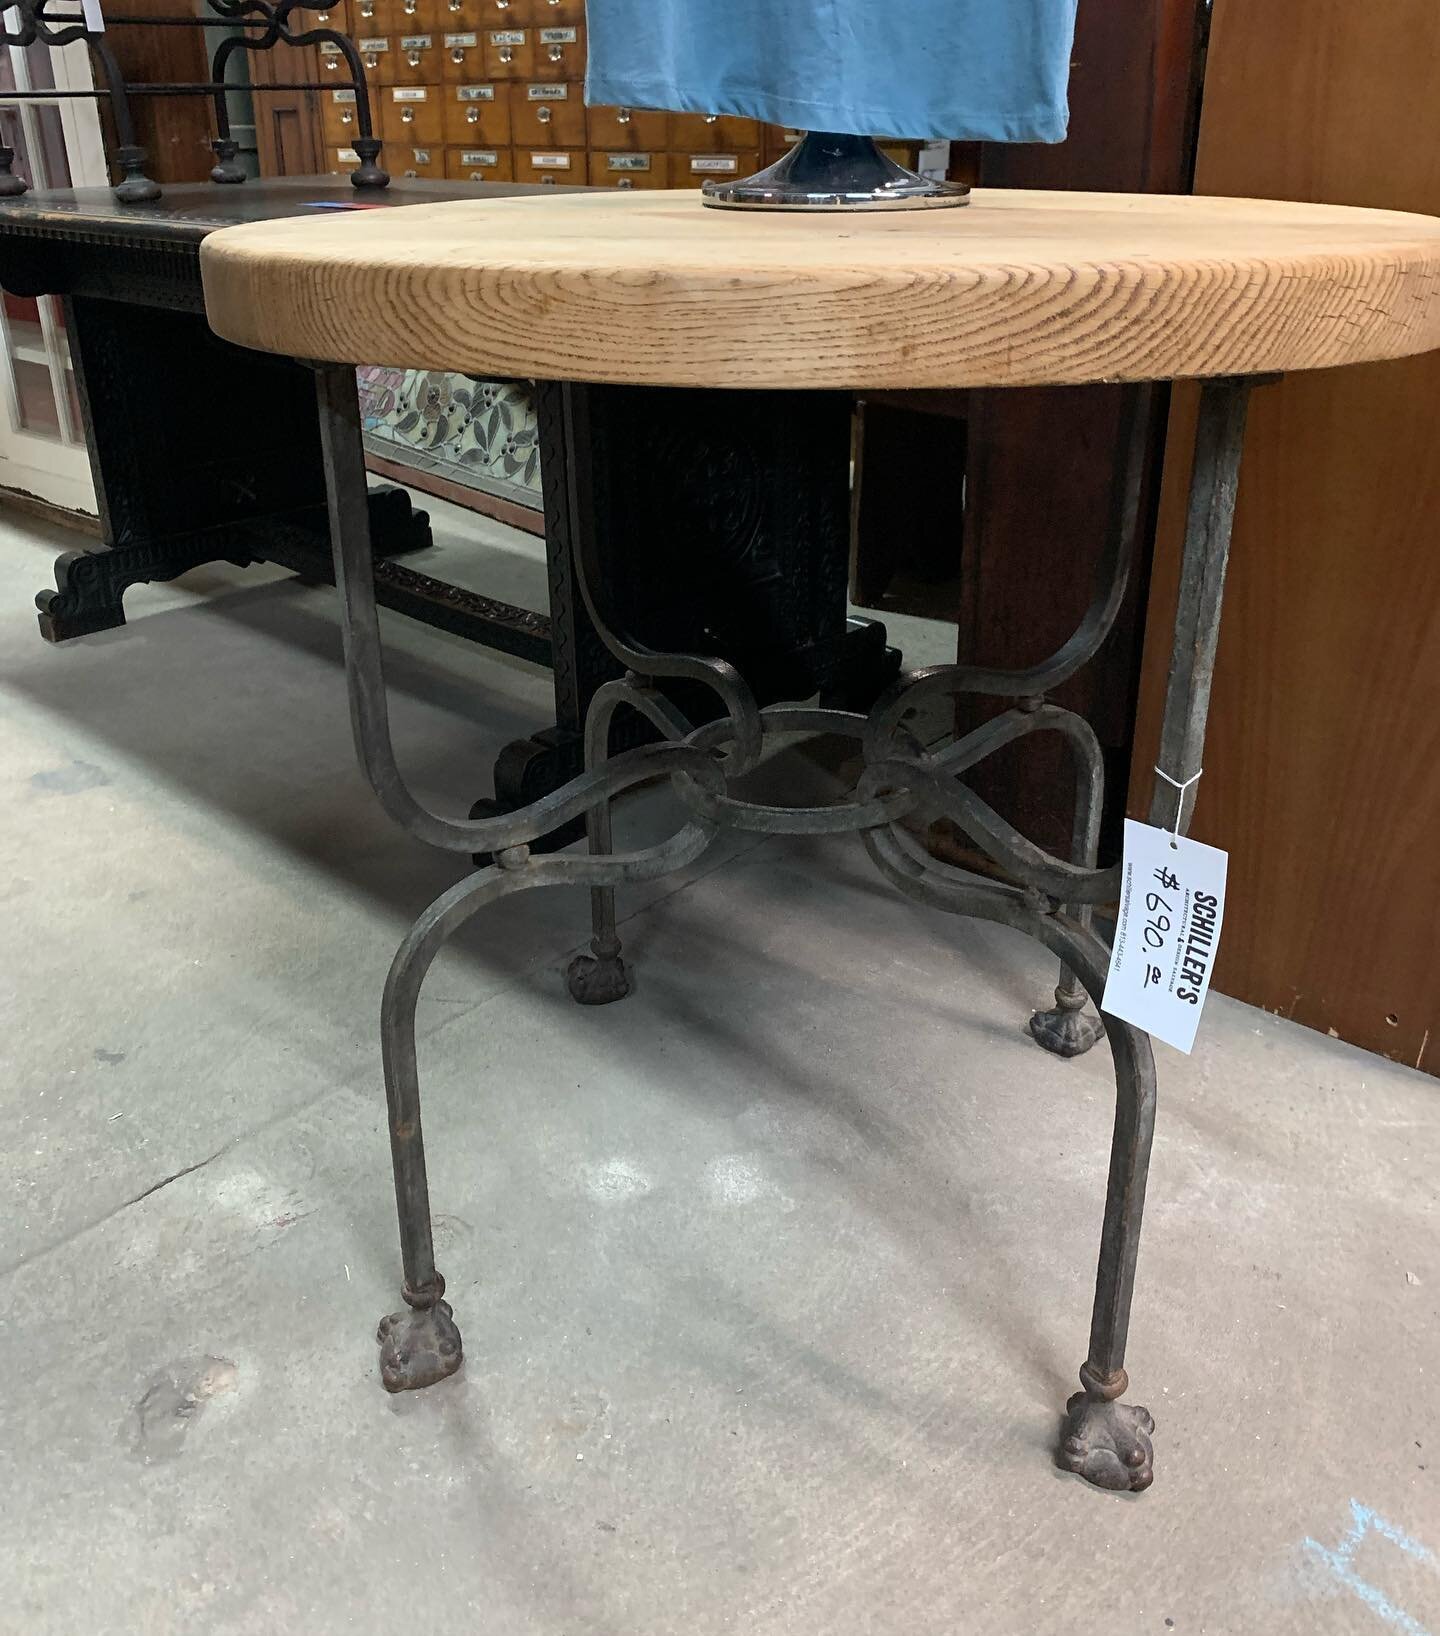 This table is a beaute.  Come snag him 690.00 #antiques #vintage #furniture #design #shoptampa